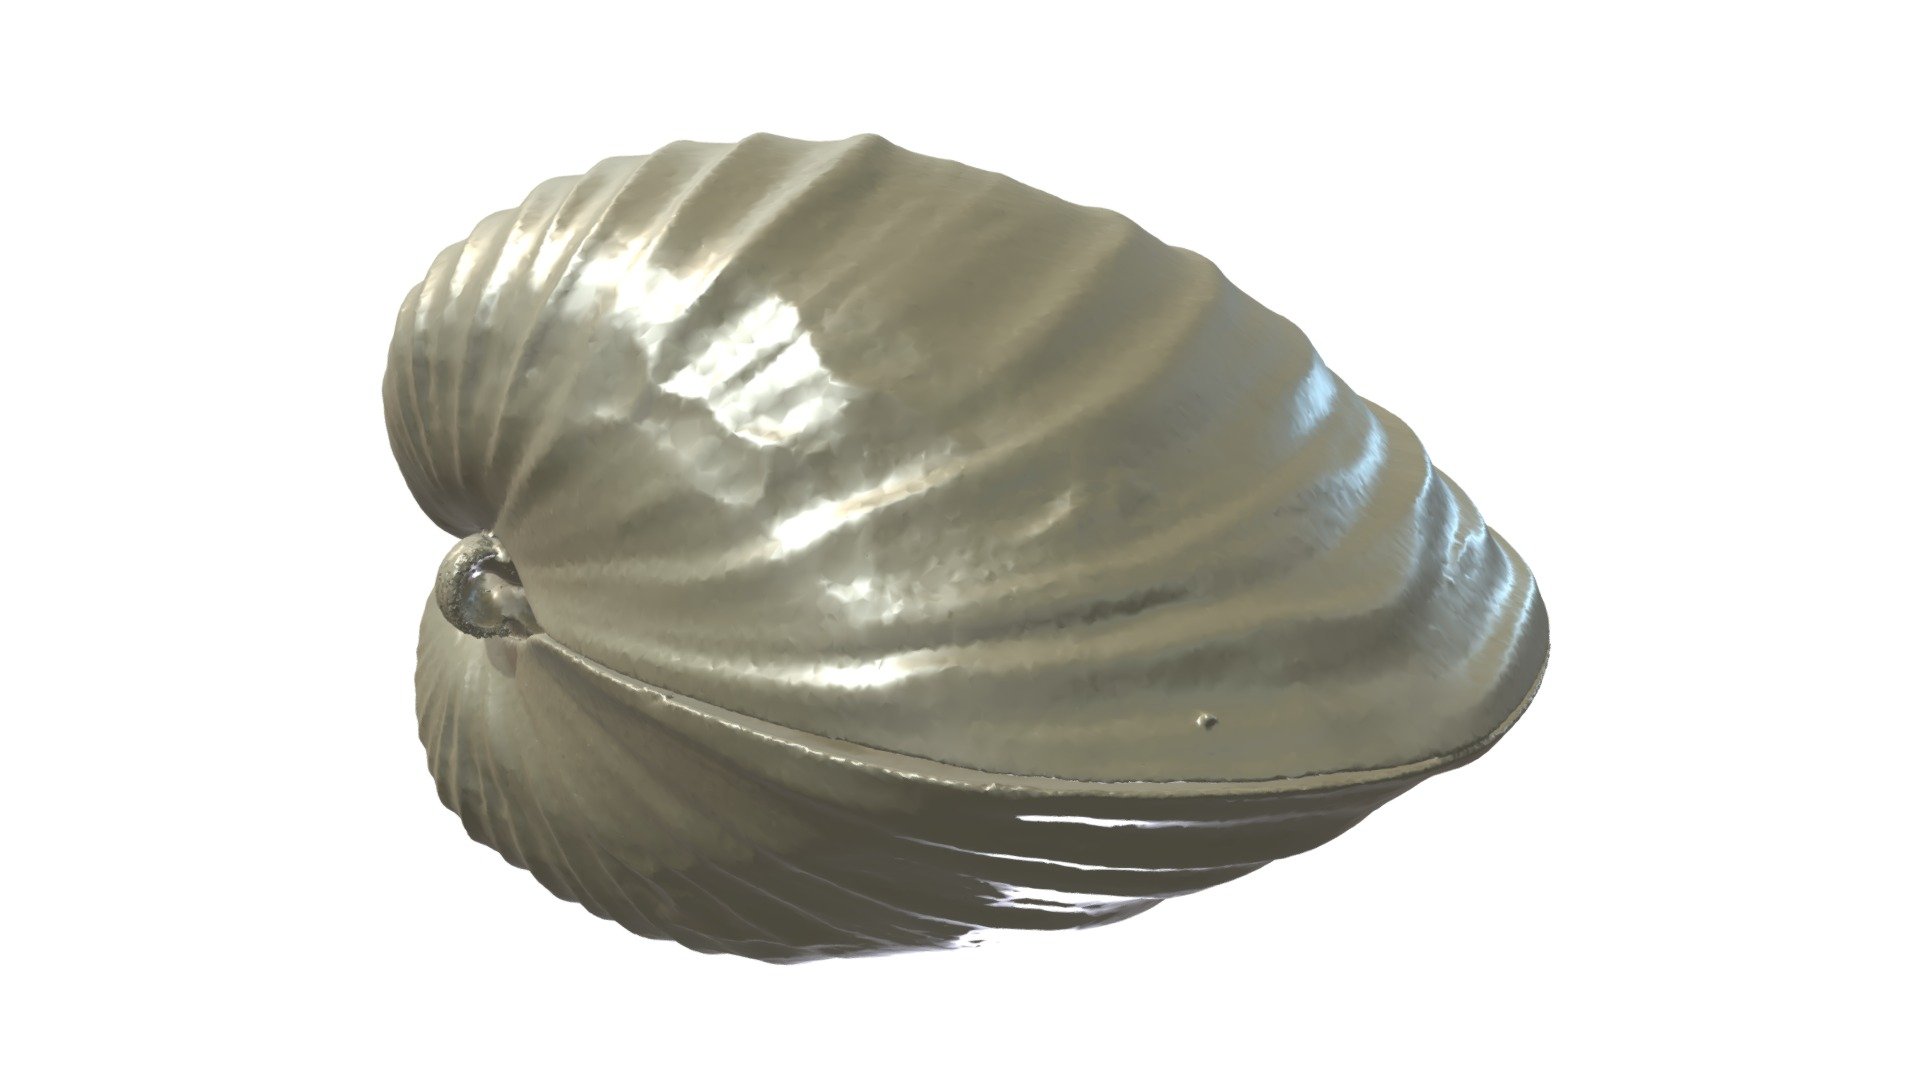 High Resolution CT Scan of Mussel